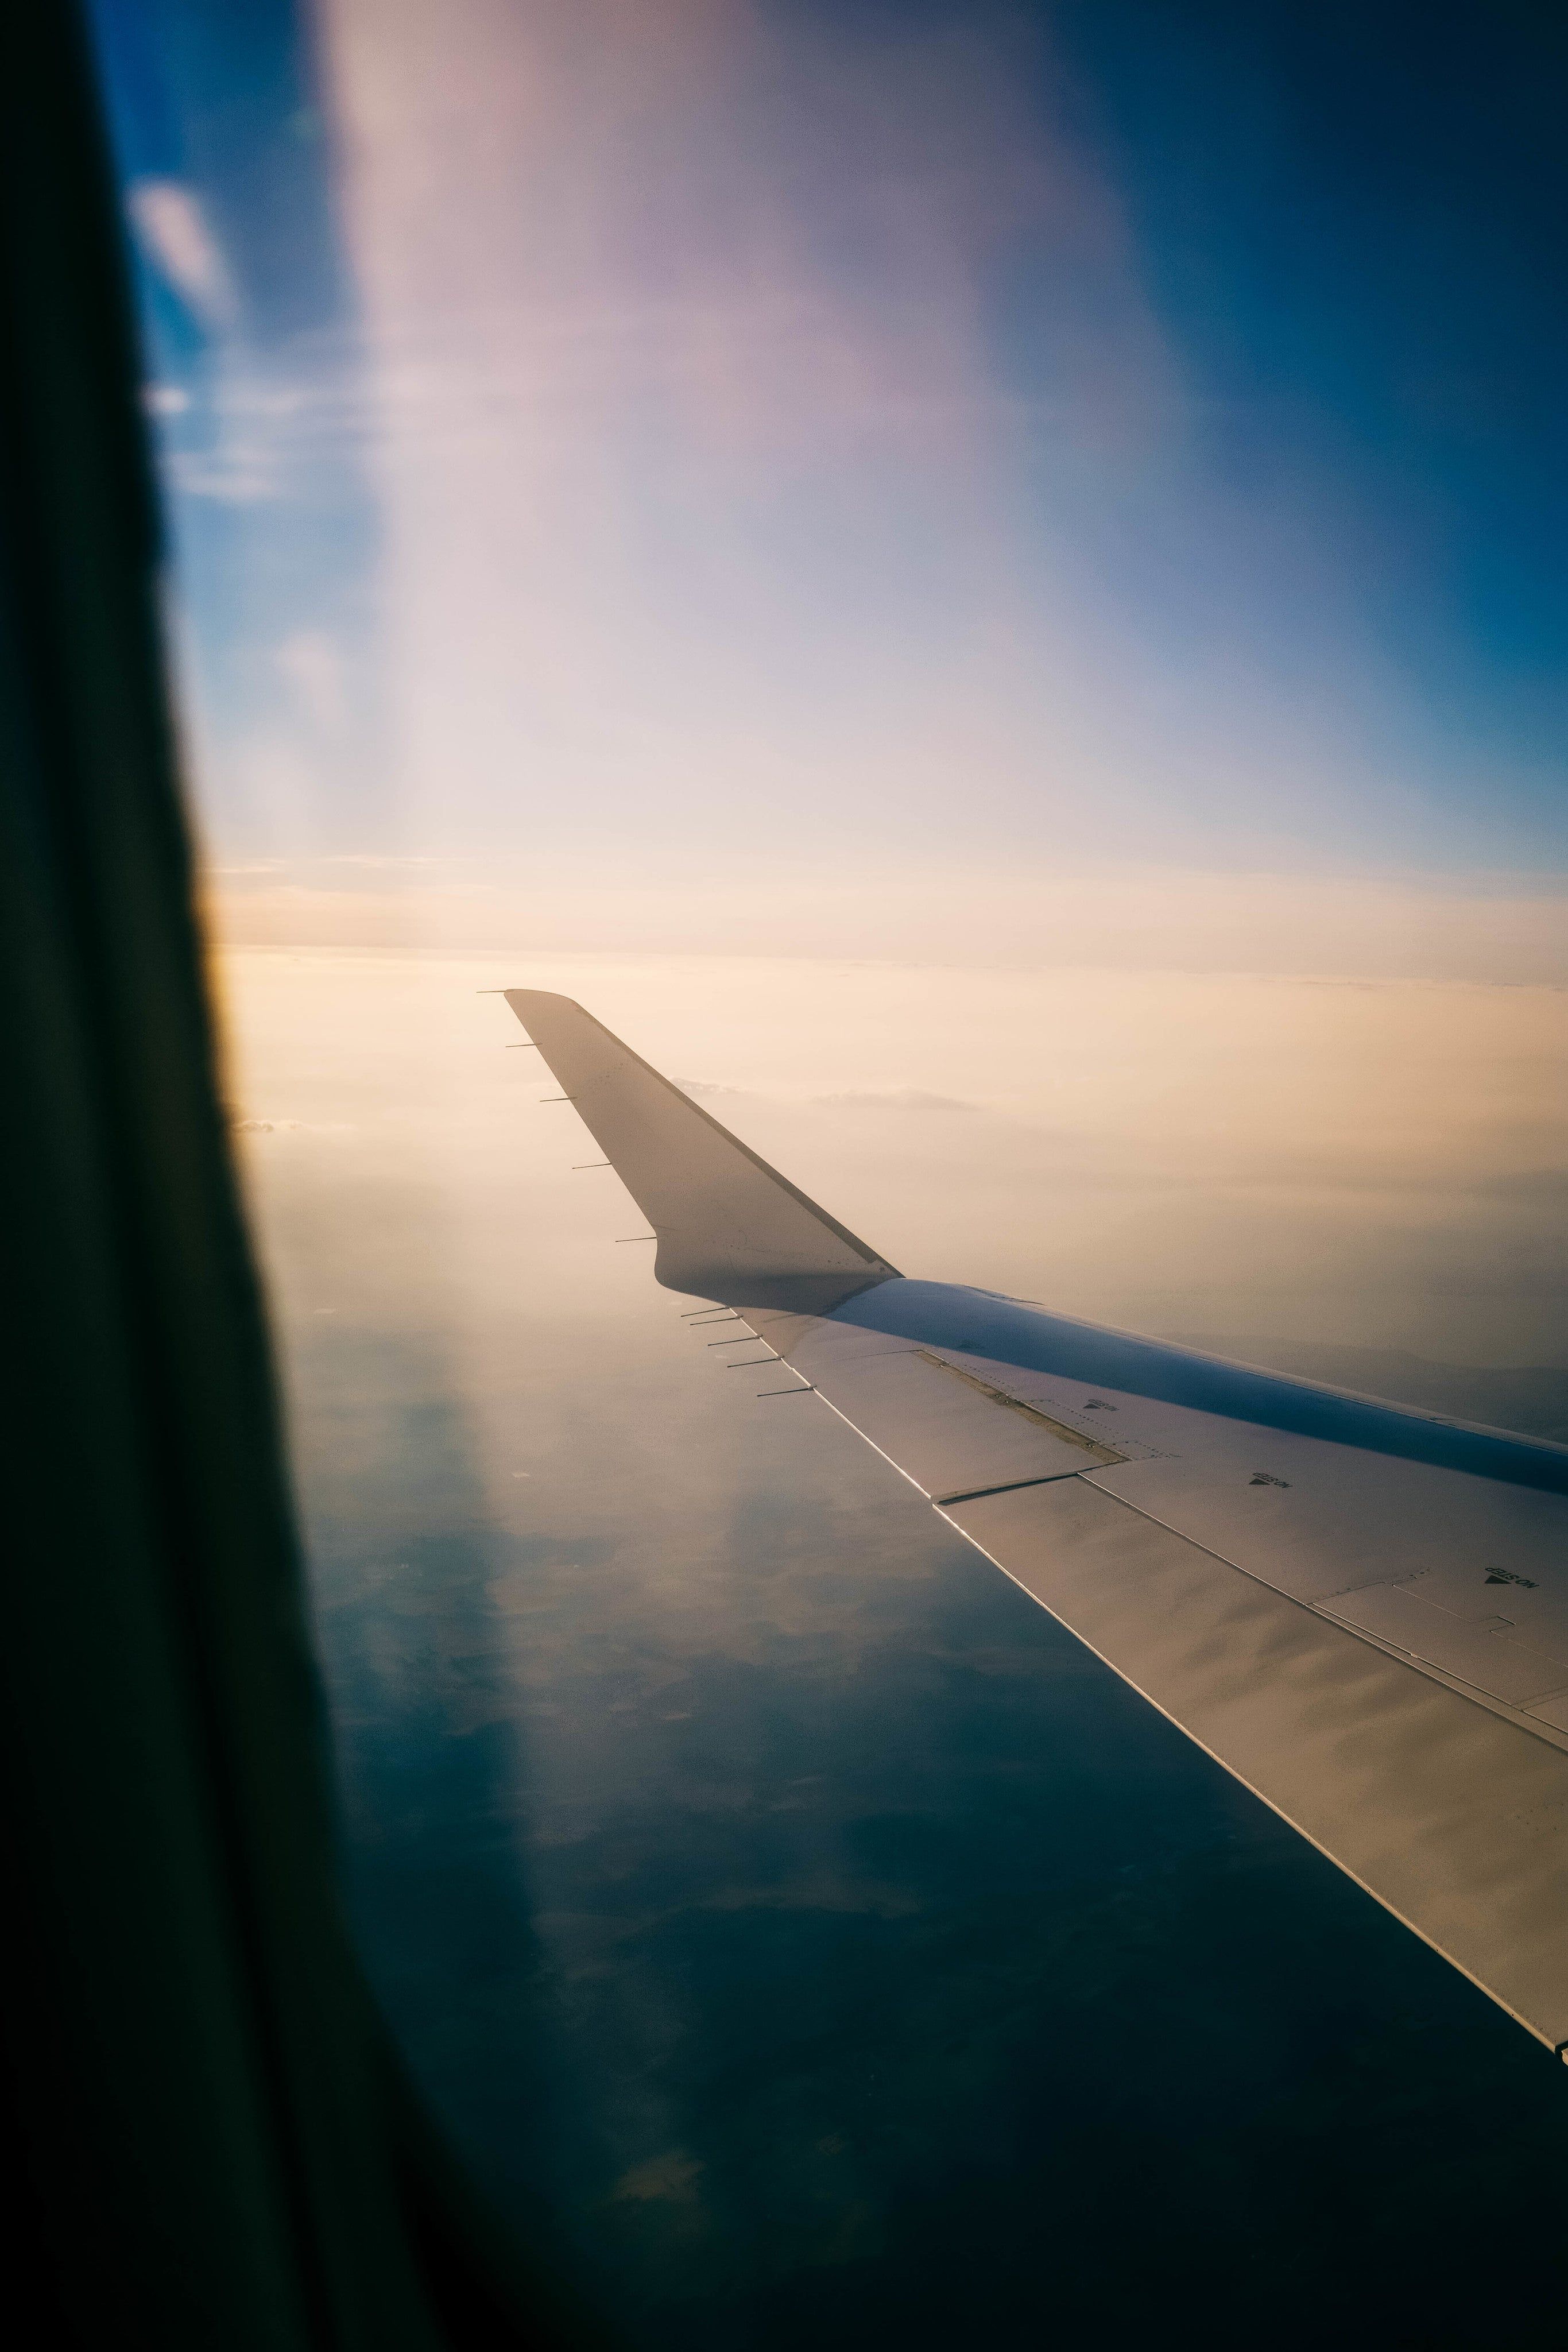 A photo of a plane wing taken from inside the plane. - Travel